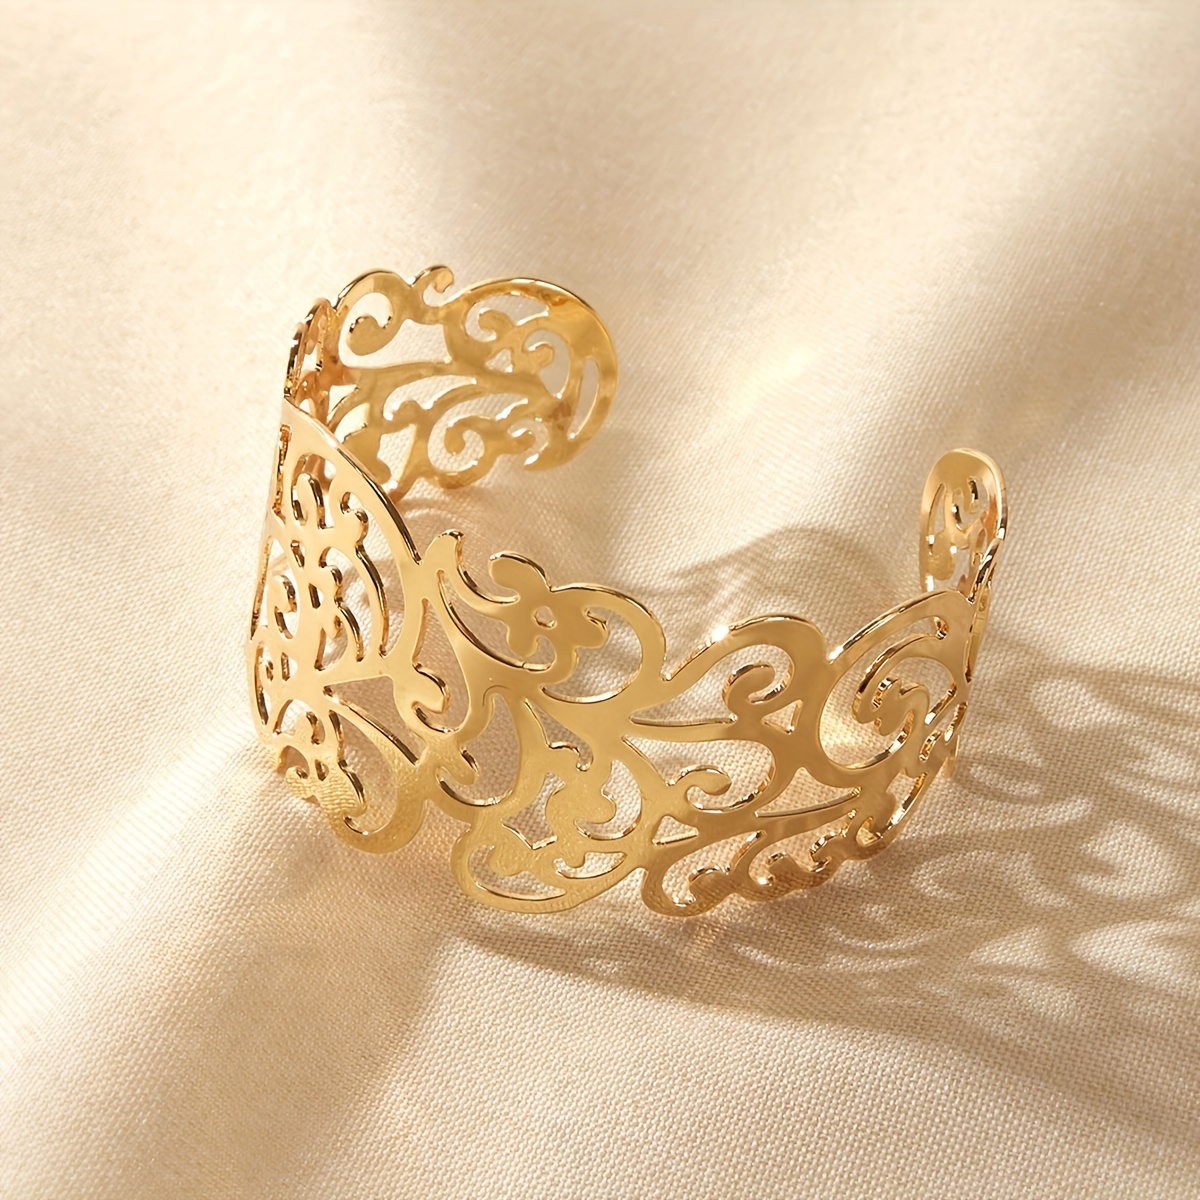 

Unique Hollow Flower Pattern Design Cuff Bangle Cuff Bracelet Iron Plated Jewelry Bohemian Ethic Style Personality Hand Jewelry